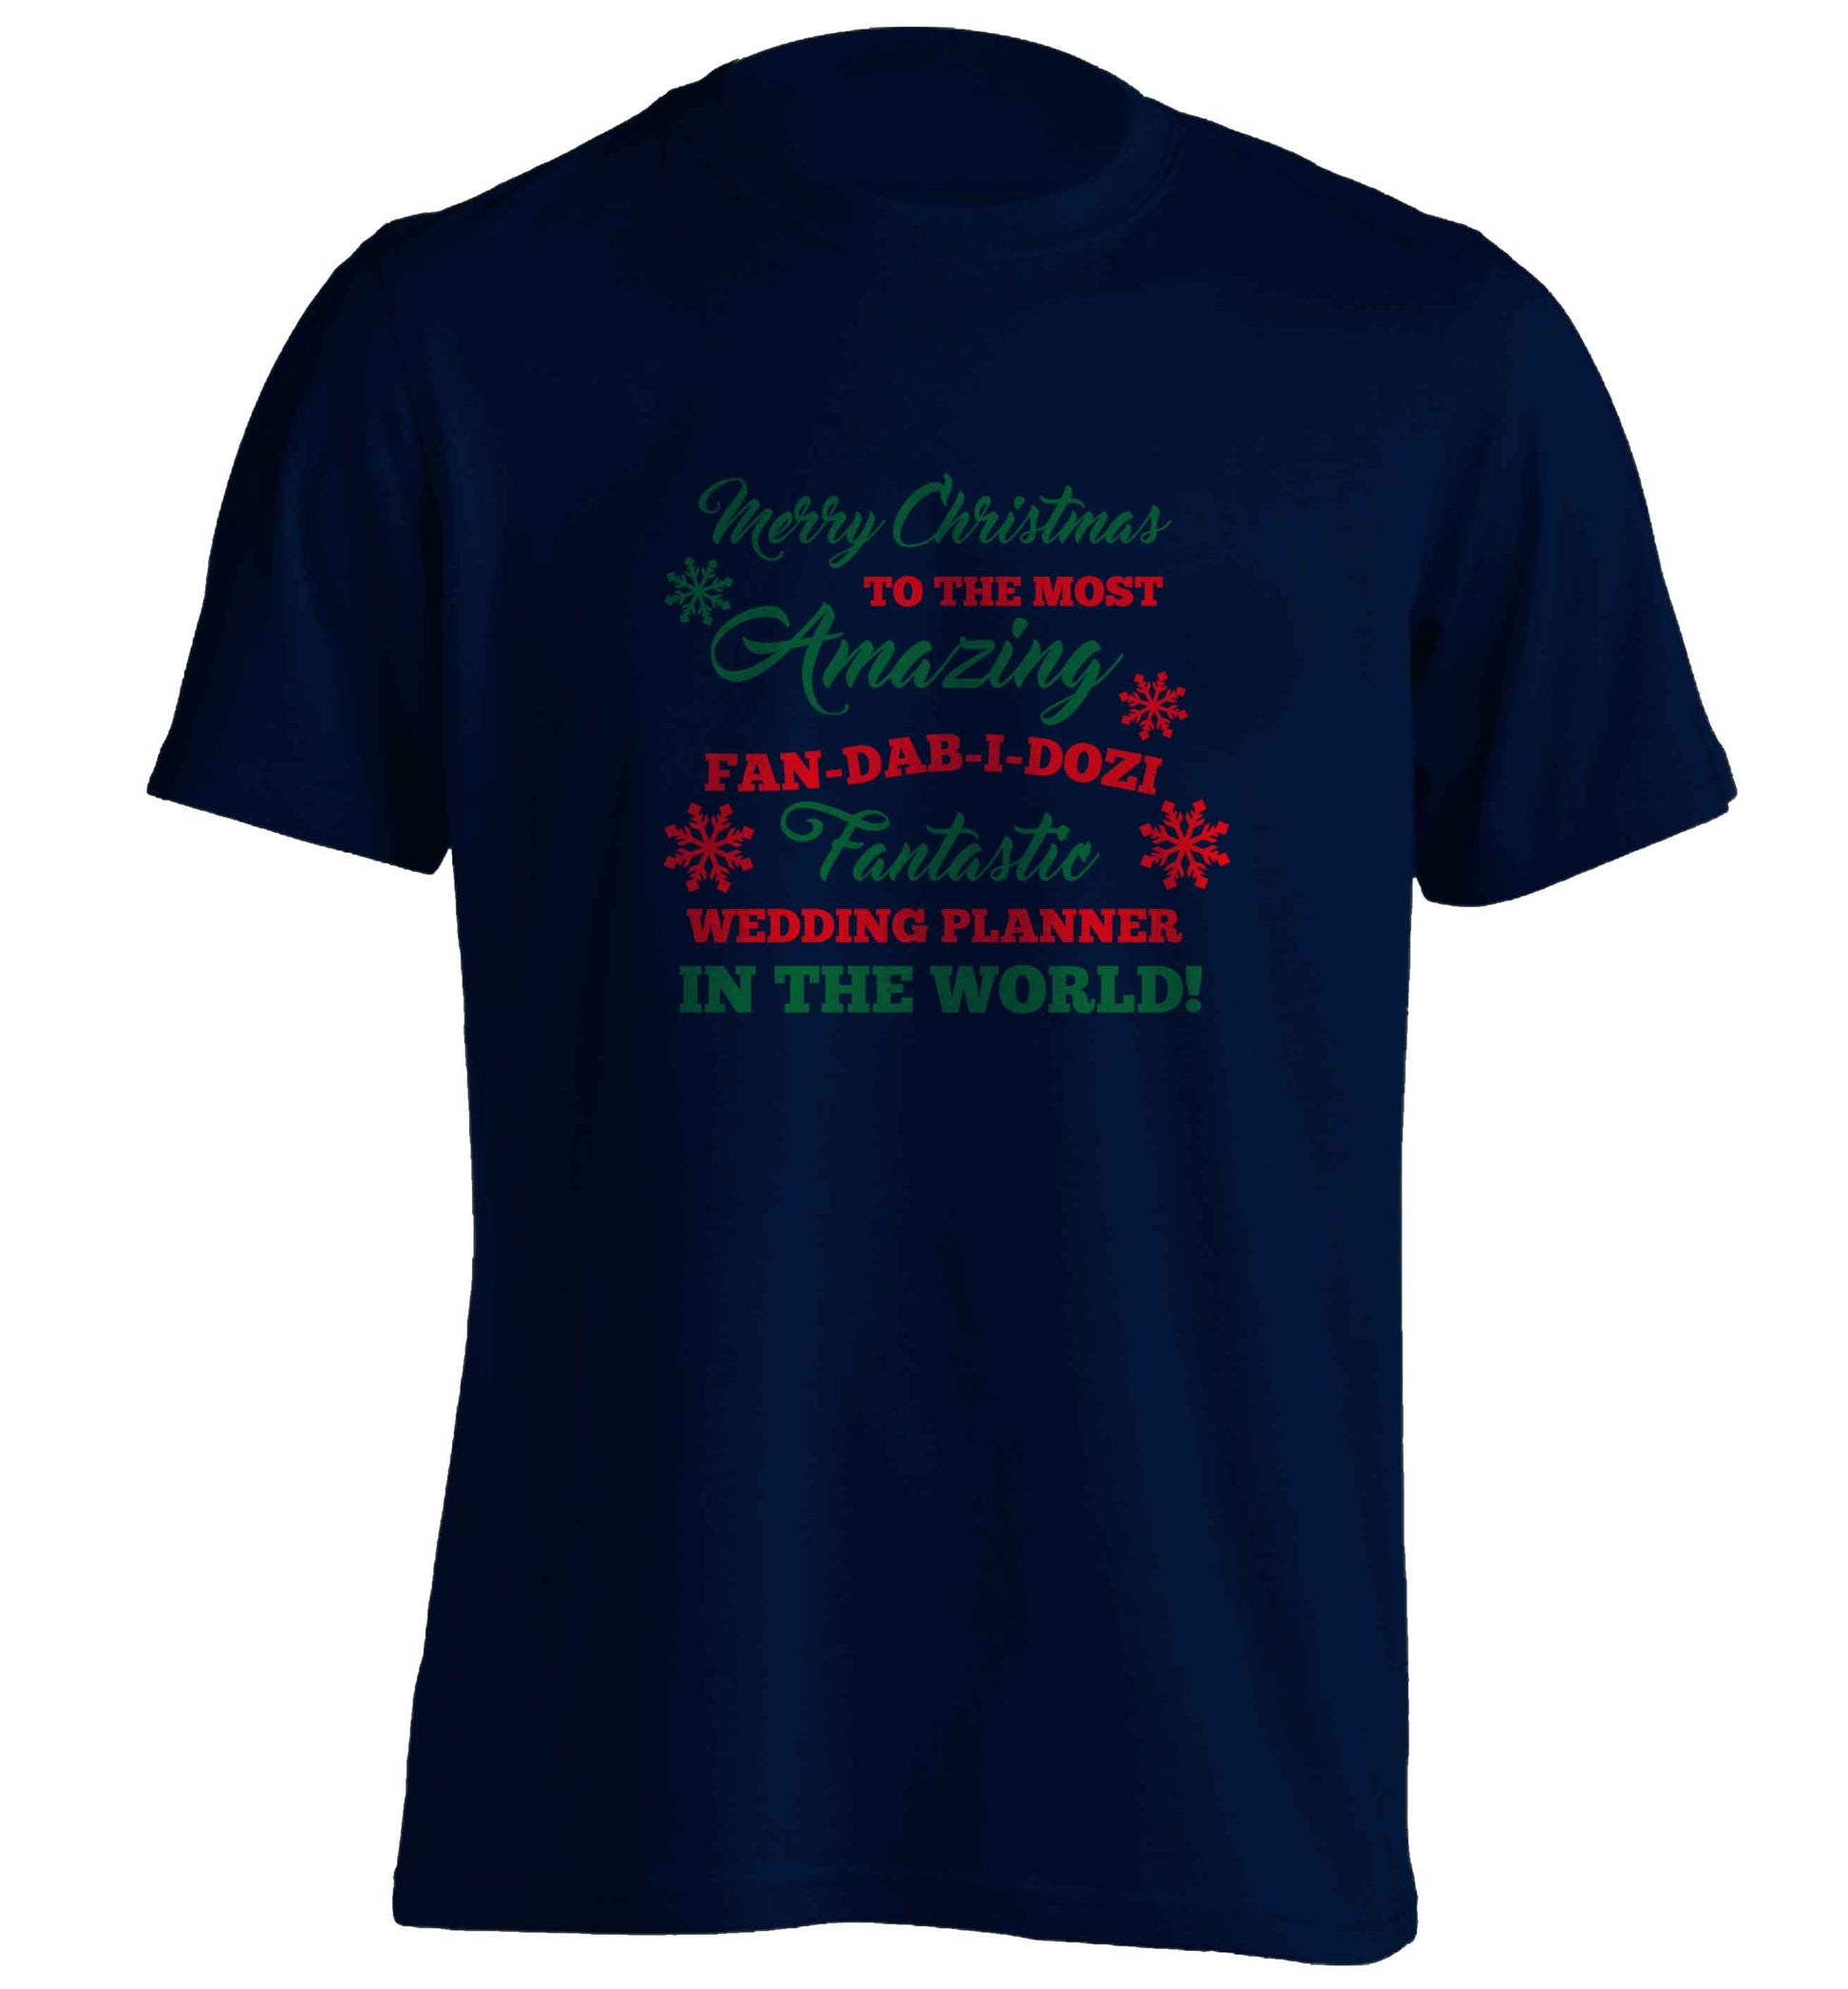 Merry Christmas to the most amazing fan-dab-i-dozi fantasic wedding planner in the world adults unisex navy Tshirt 2XL